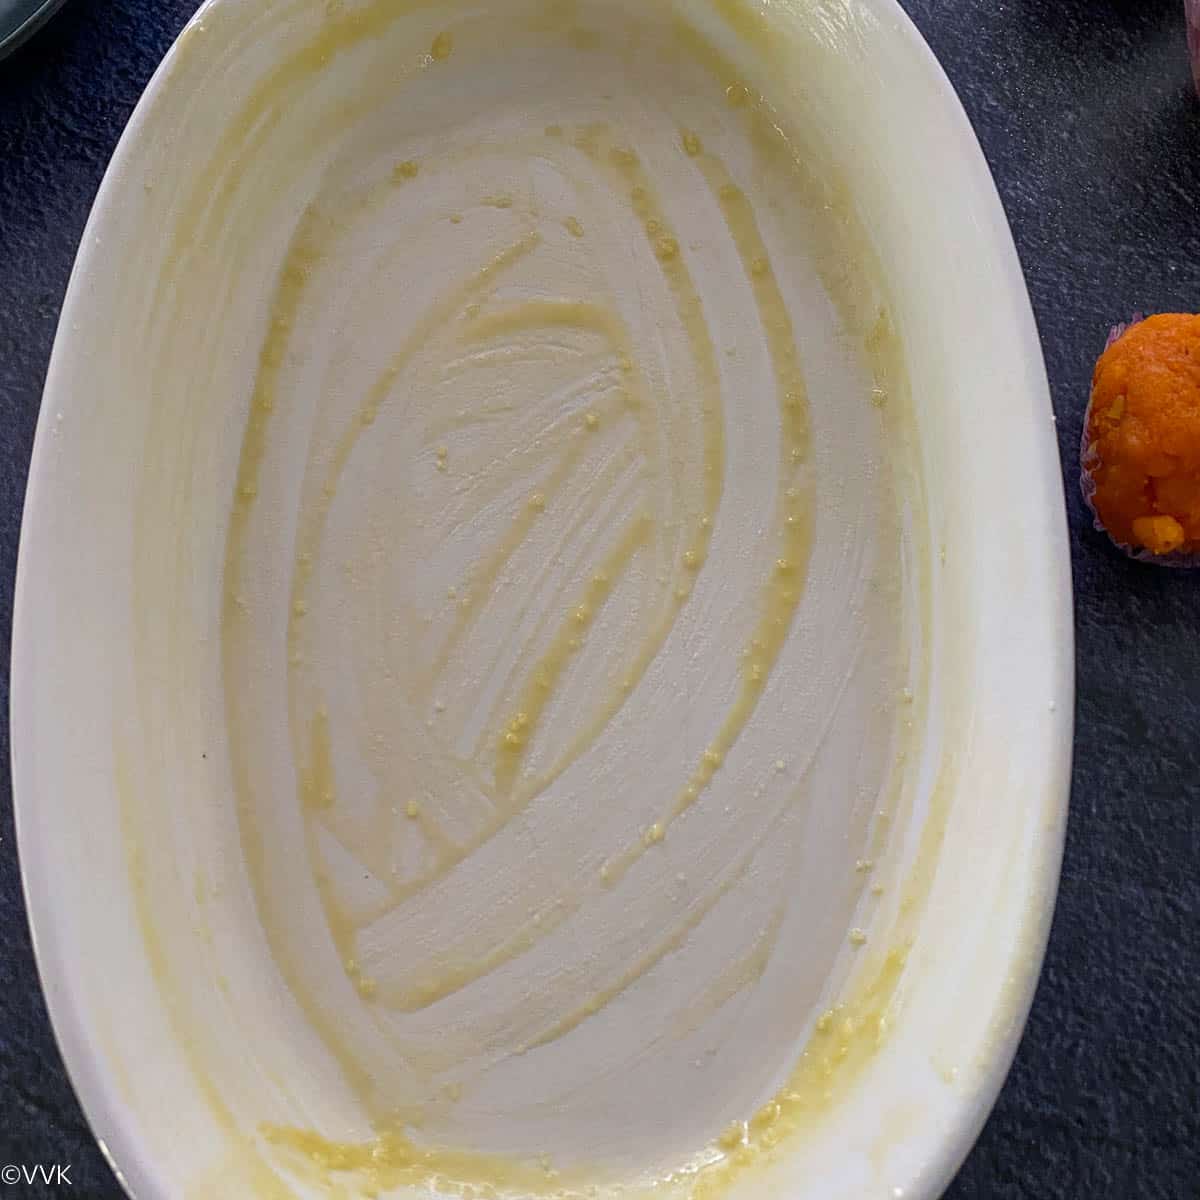 greasing the baking dish with ghee